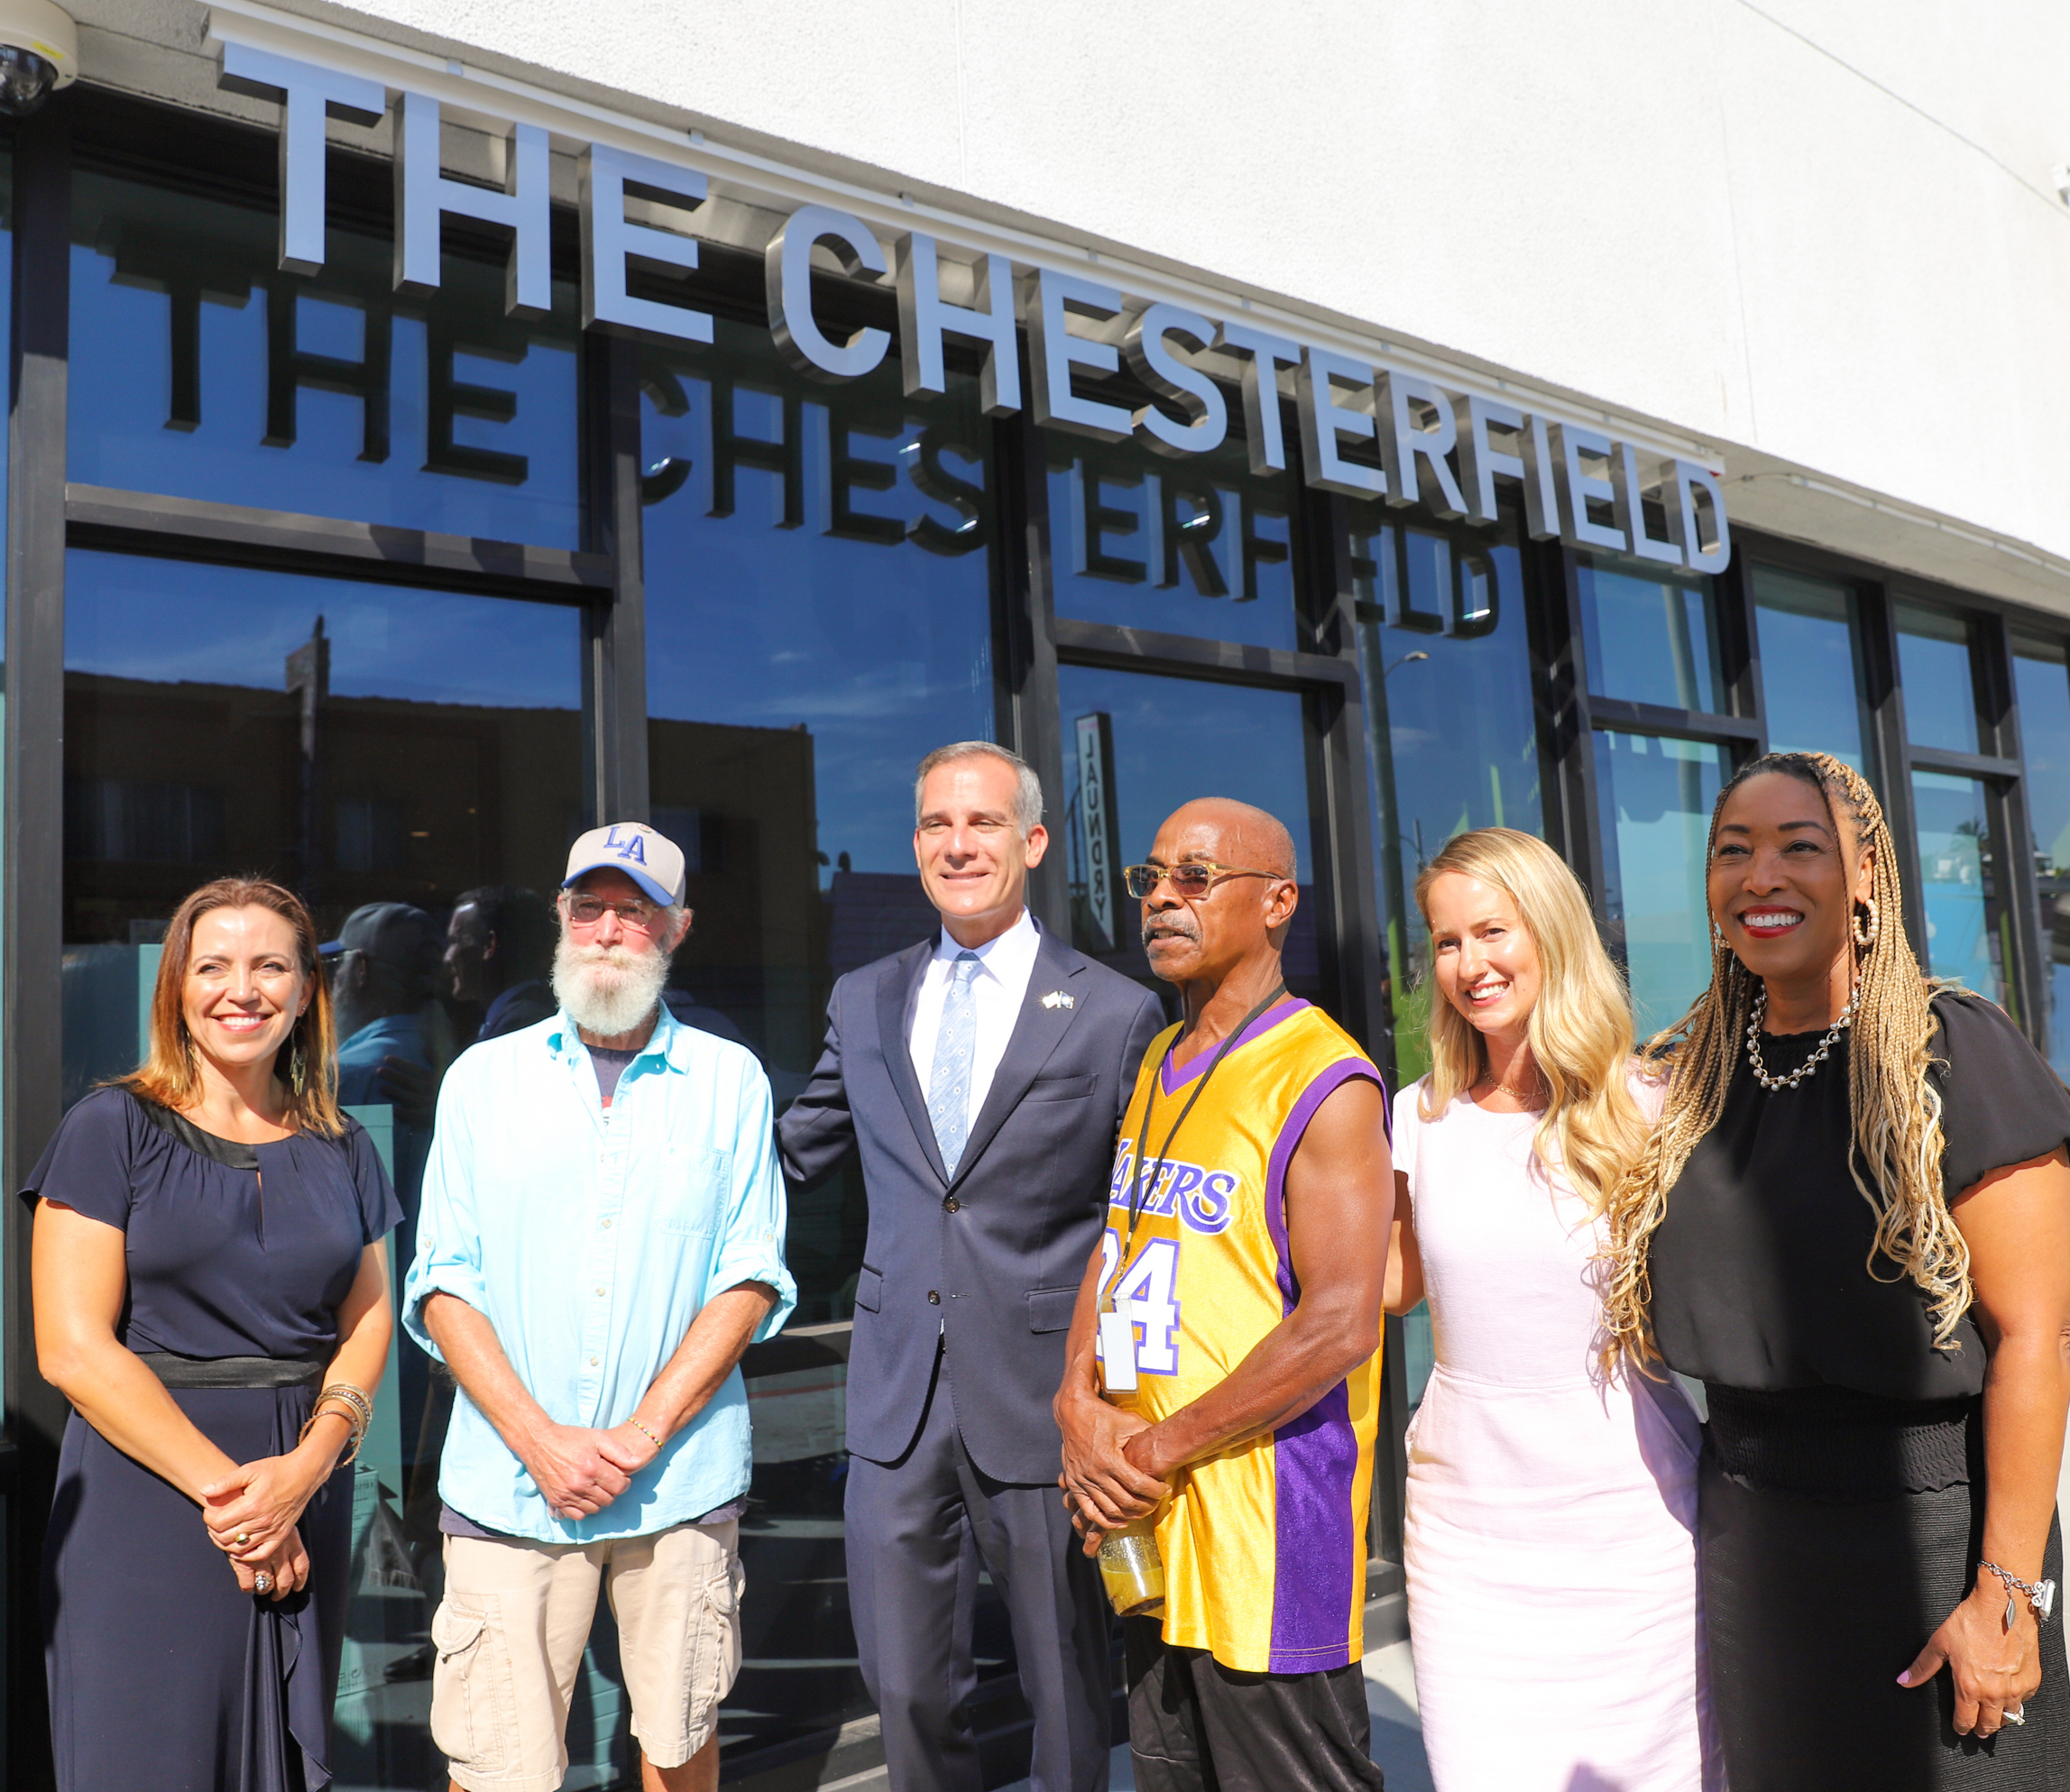 The Chesterfield Grand Opening: New Affordable Community Houses Formerly Homeless Seniors in LA